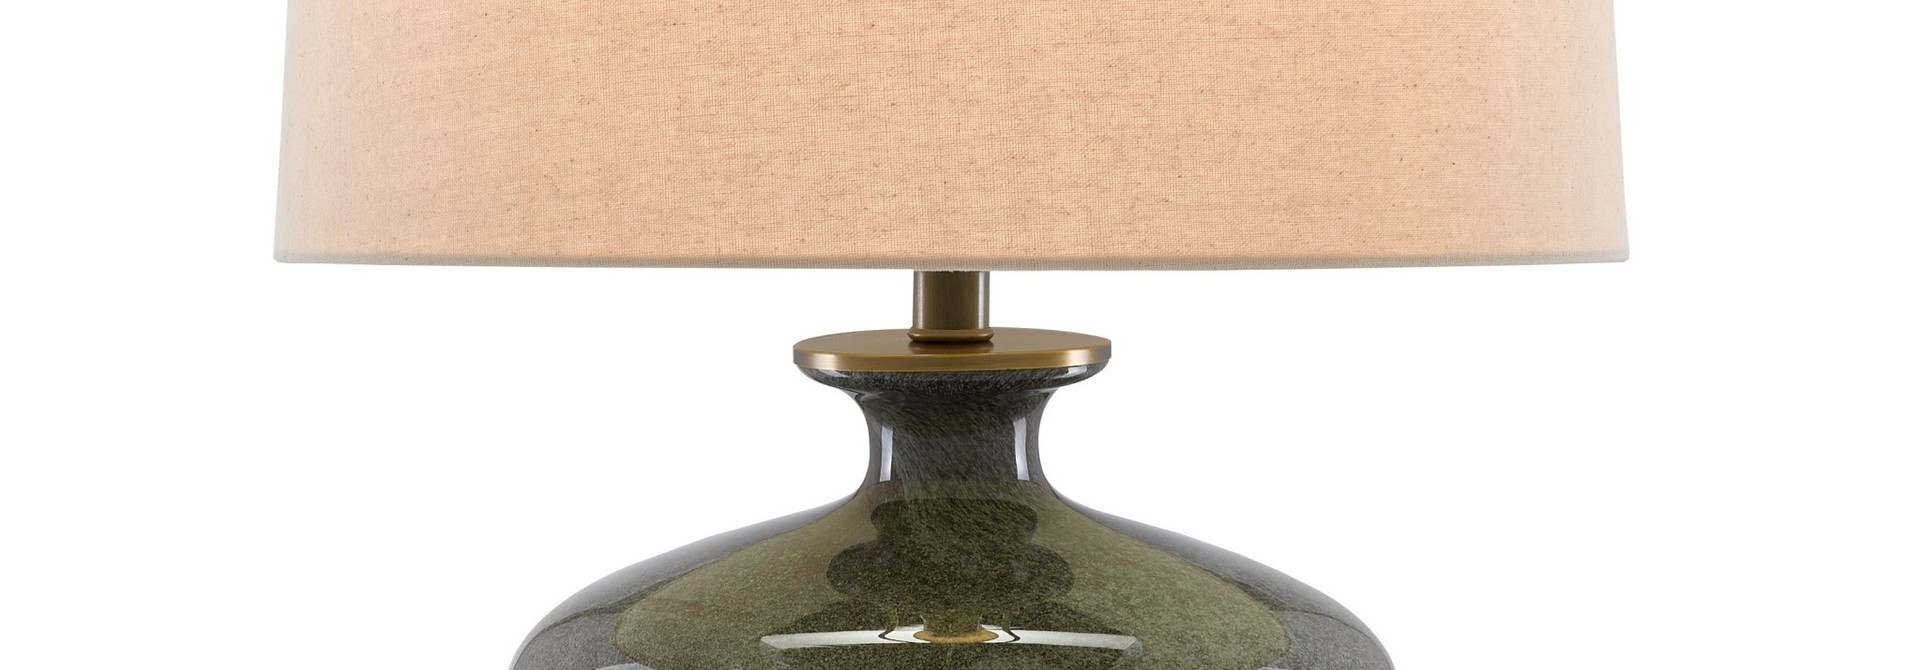 Greenlea | The Table Lamp Collection - 17 Inch x 17 Inch x 21.25 Inch